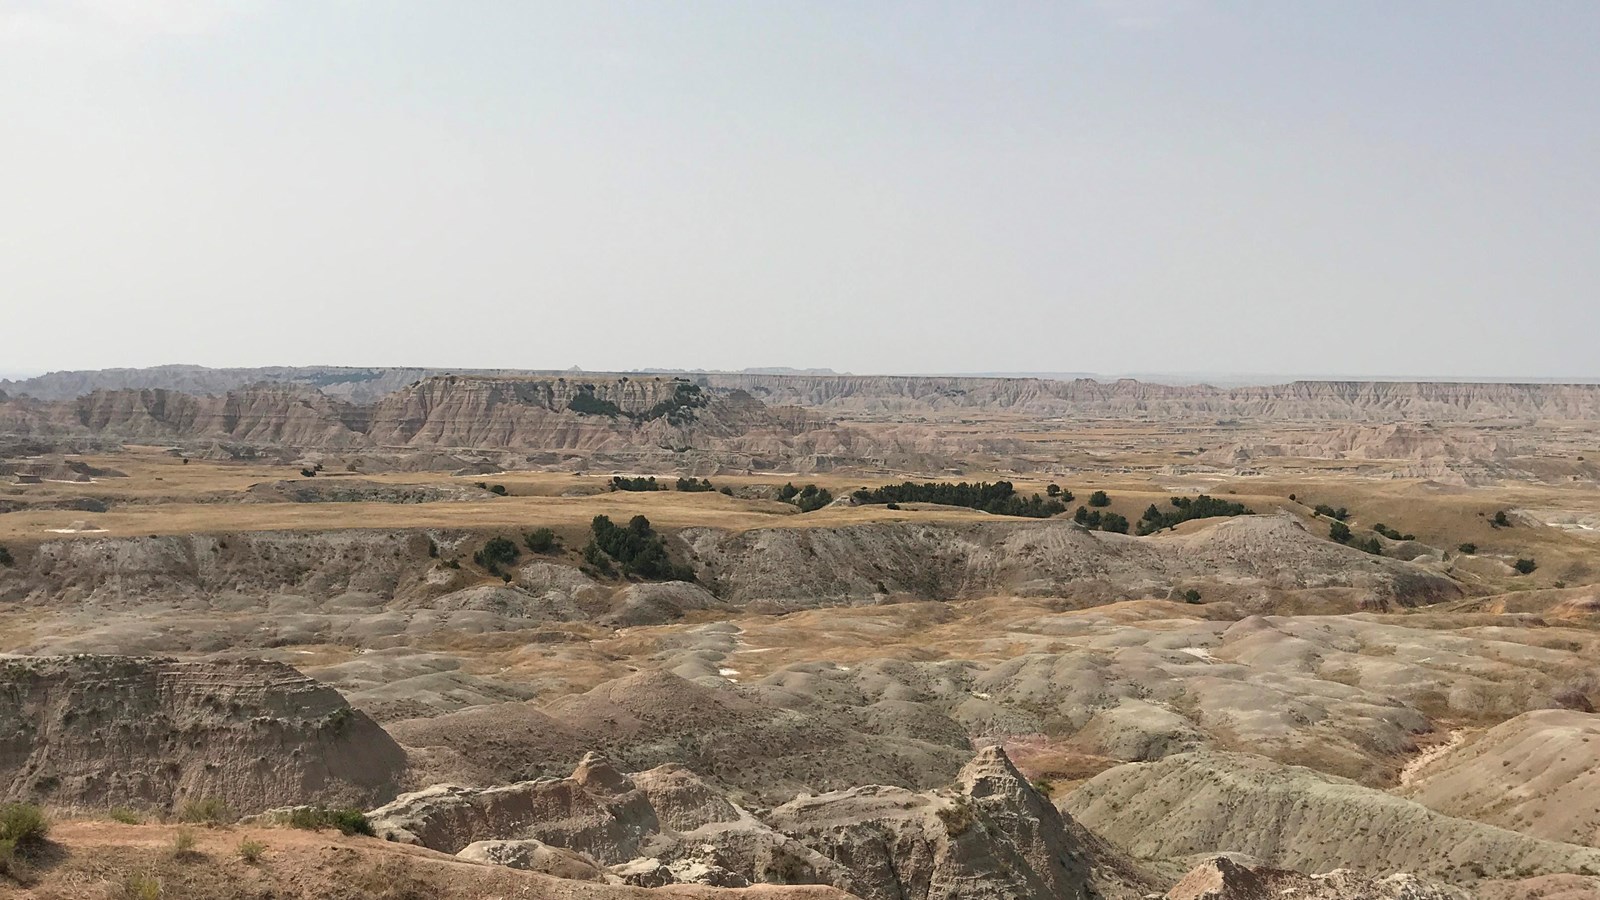 Badlands buttes extend miles into the horizon, dotted by small islands of trees under blue sky.